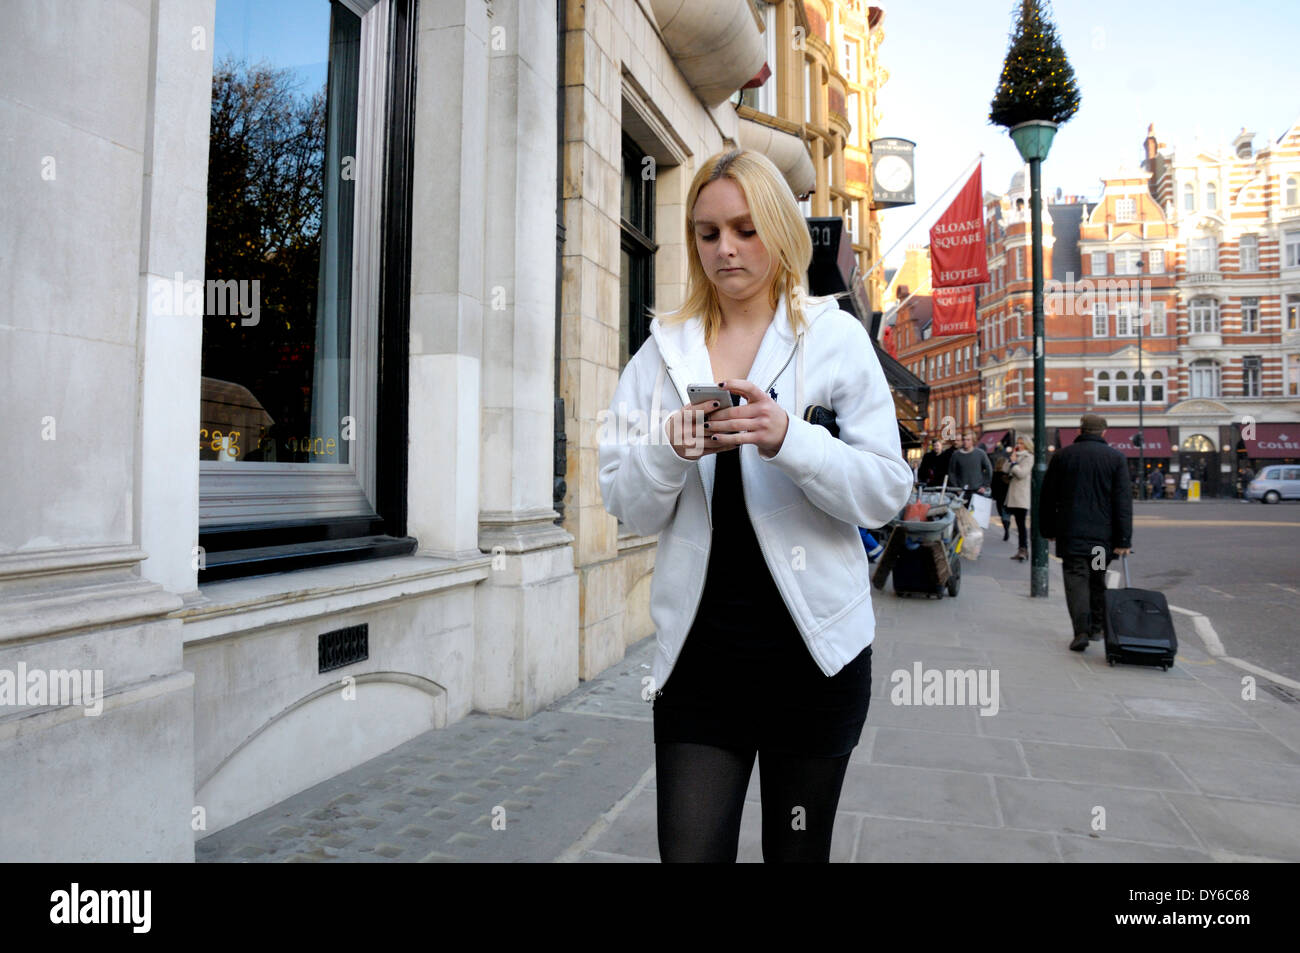 London, England, UK. Young woman walking and using her mobile phone in Sloane Square Stock Photo